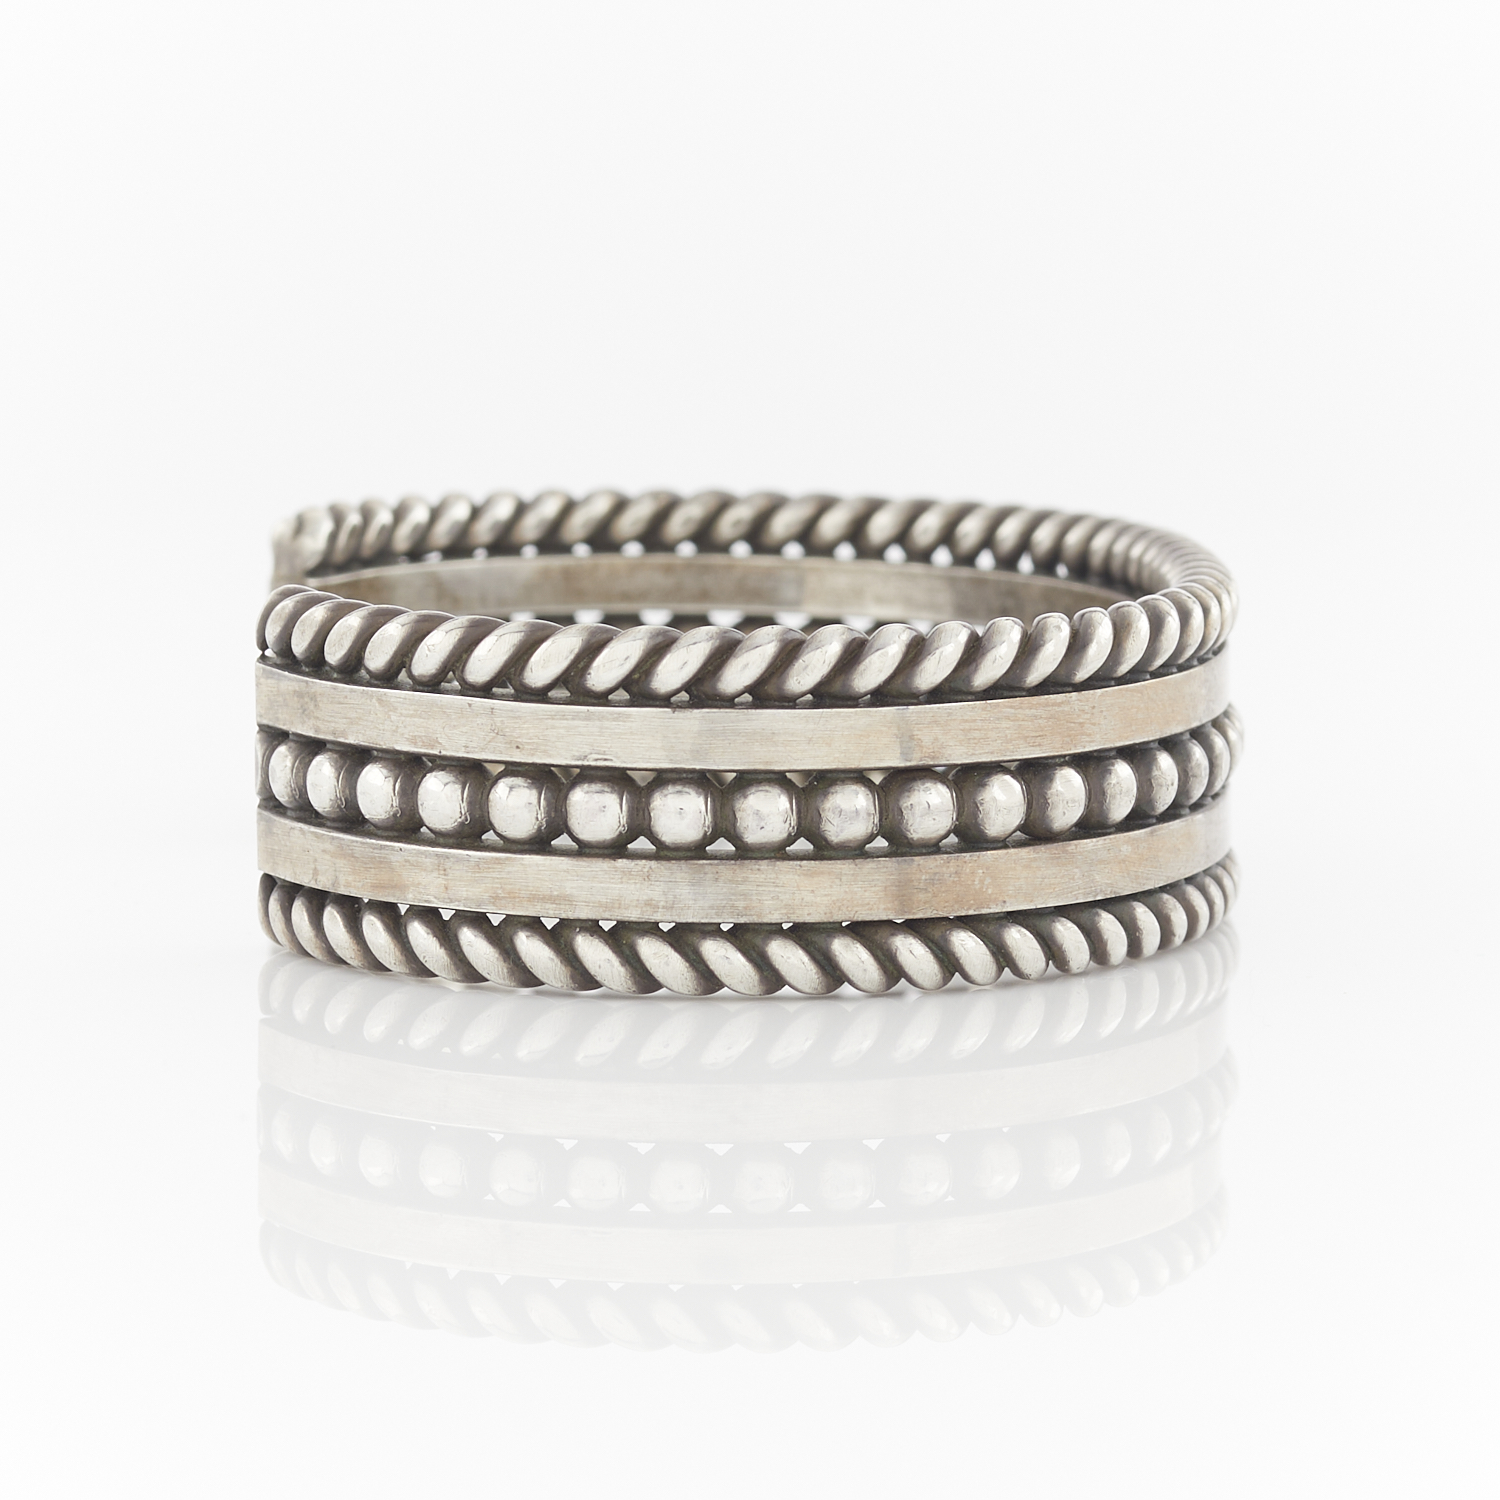 Gary Reeves Sterling Silver Bangle - Image 6 of 10